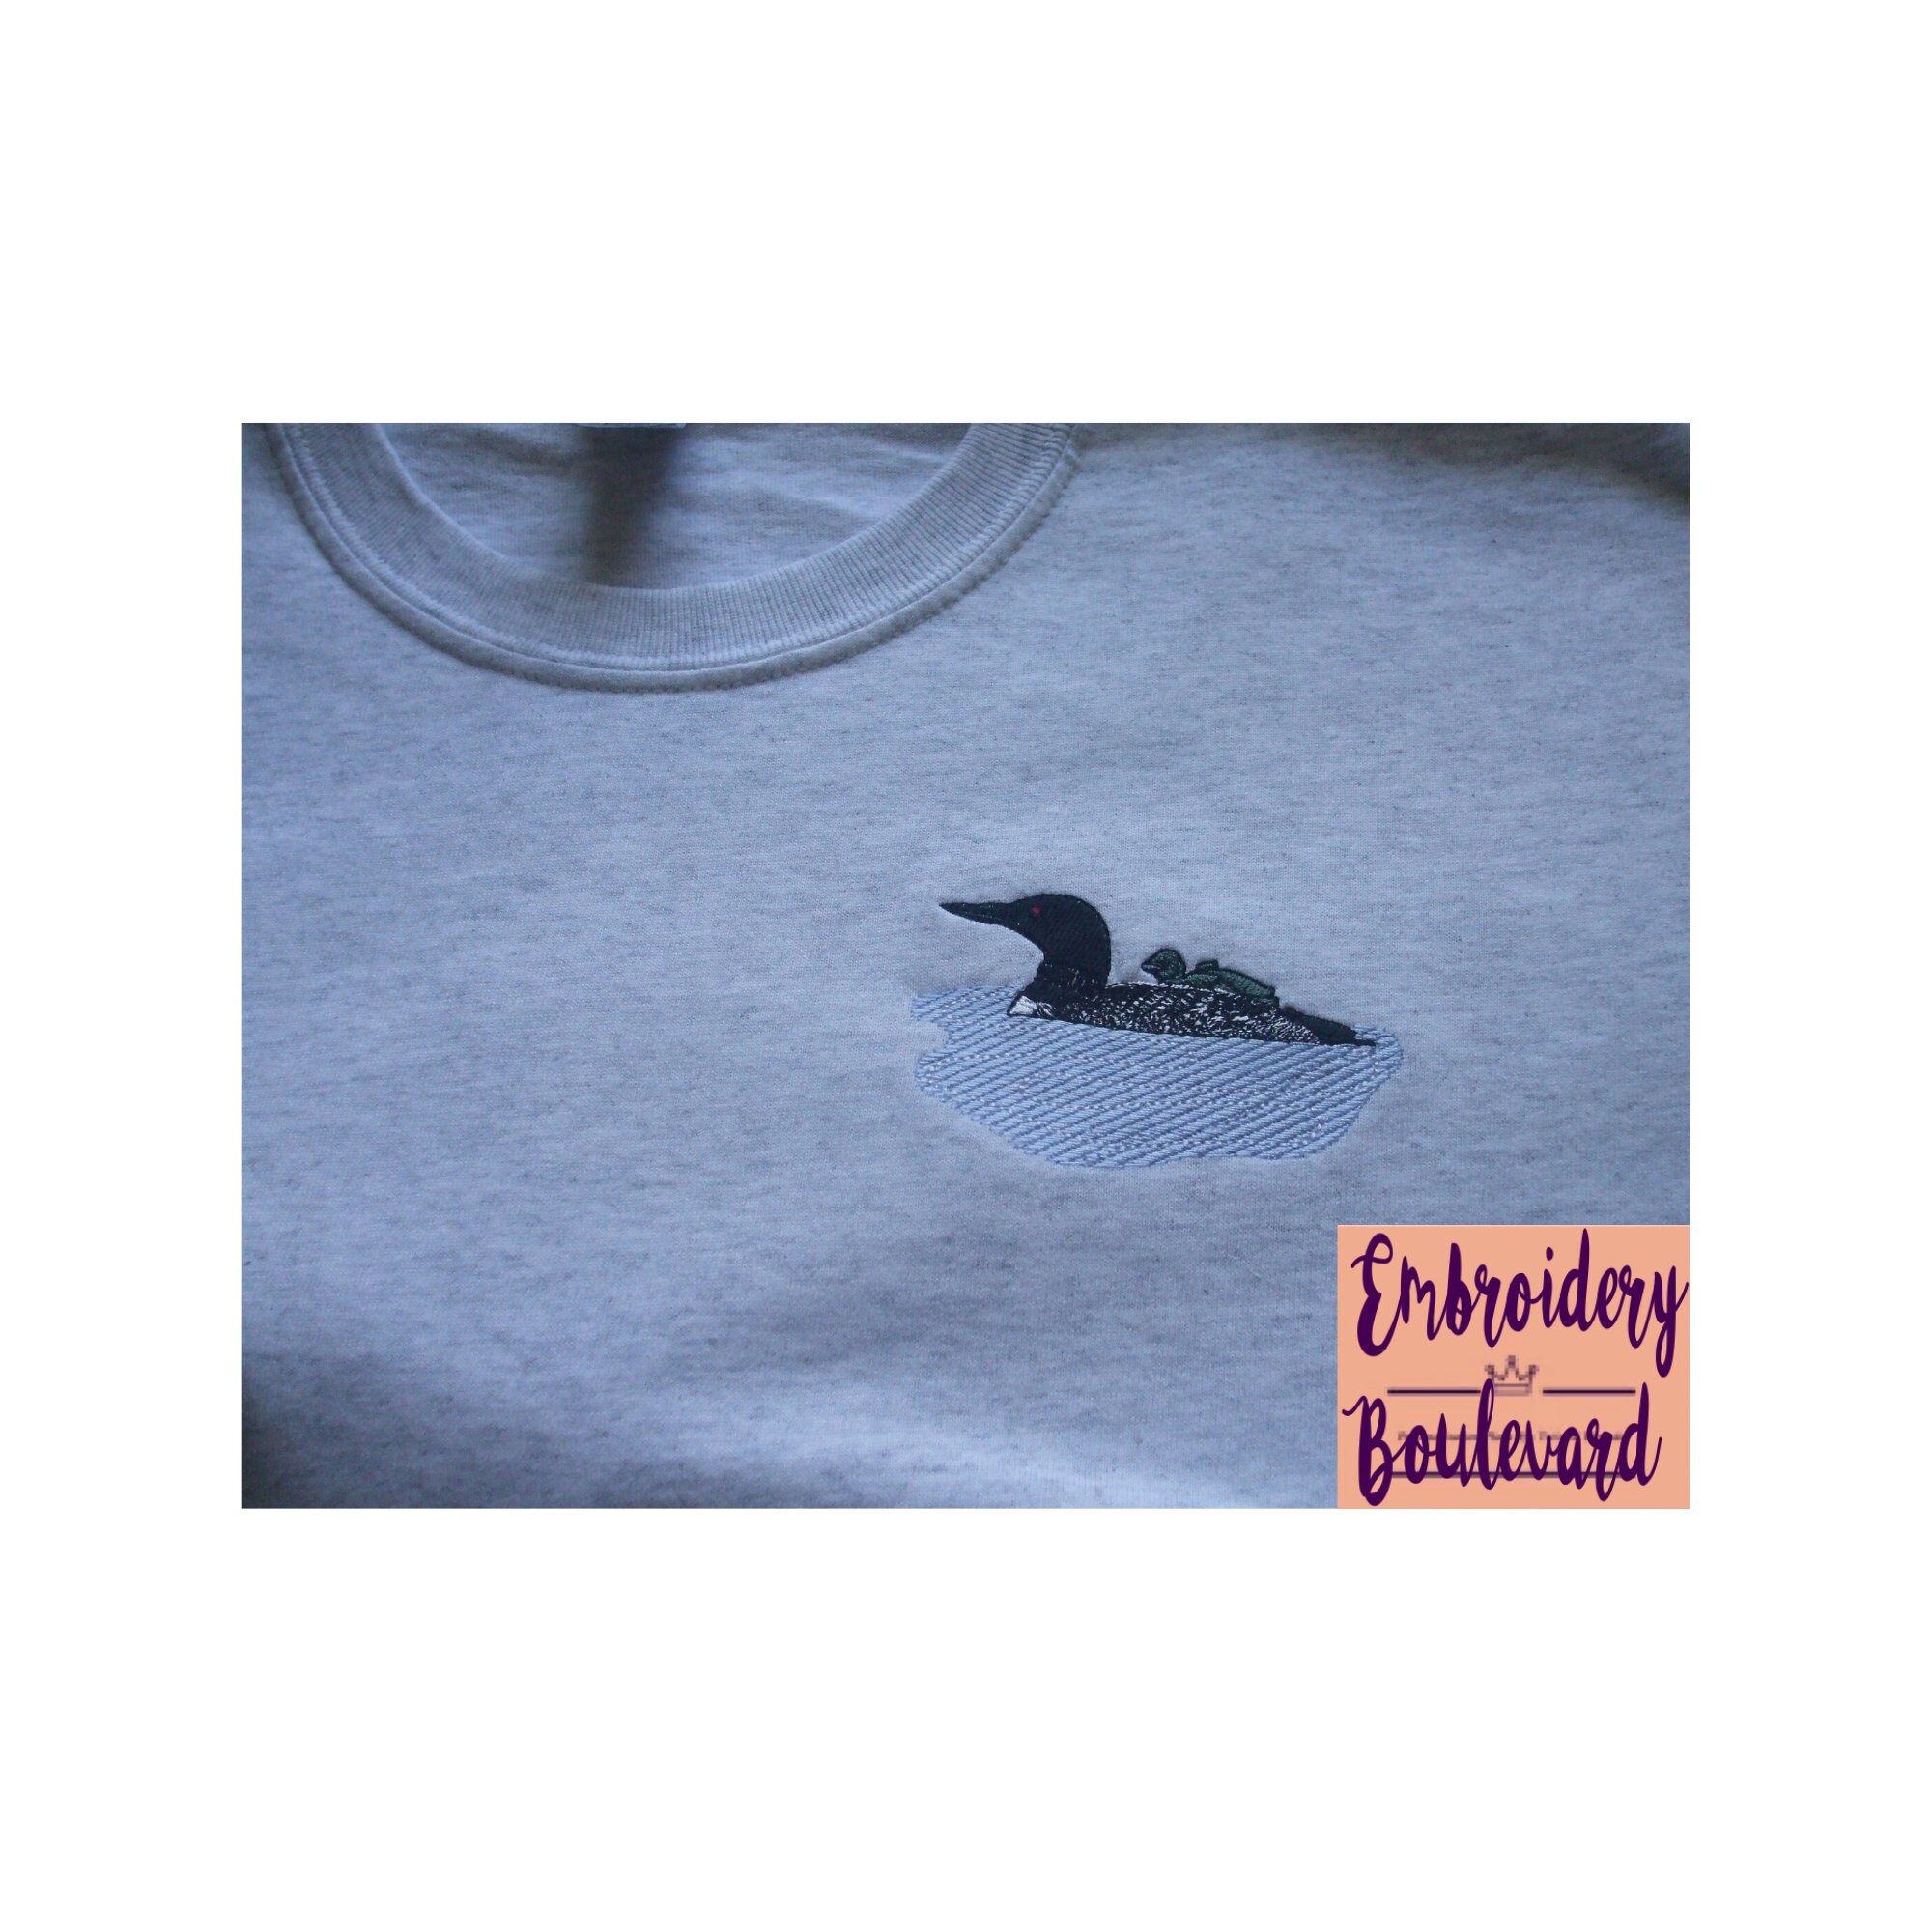 Loon Shirt, Embroidered Loon T-shirt, Loon Gift, Loon T-shirt, Loon Bird  Shirt, Baby Loon Shirt -  Canada